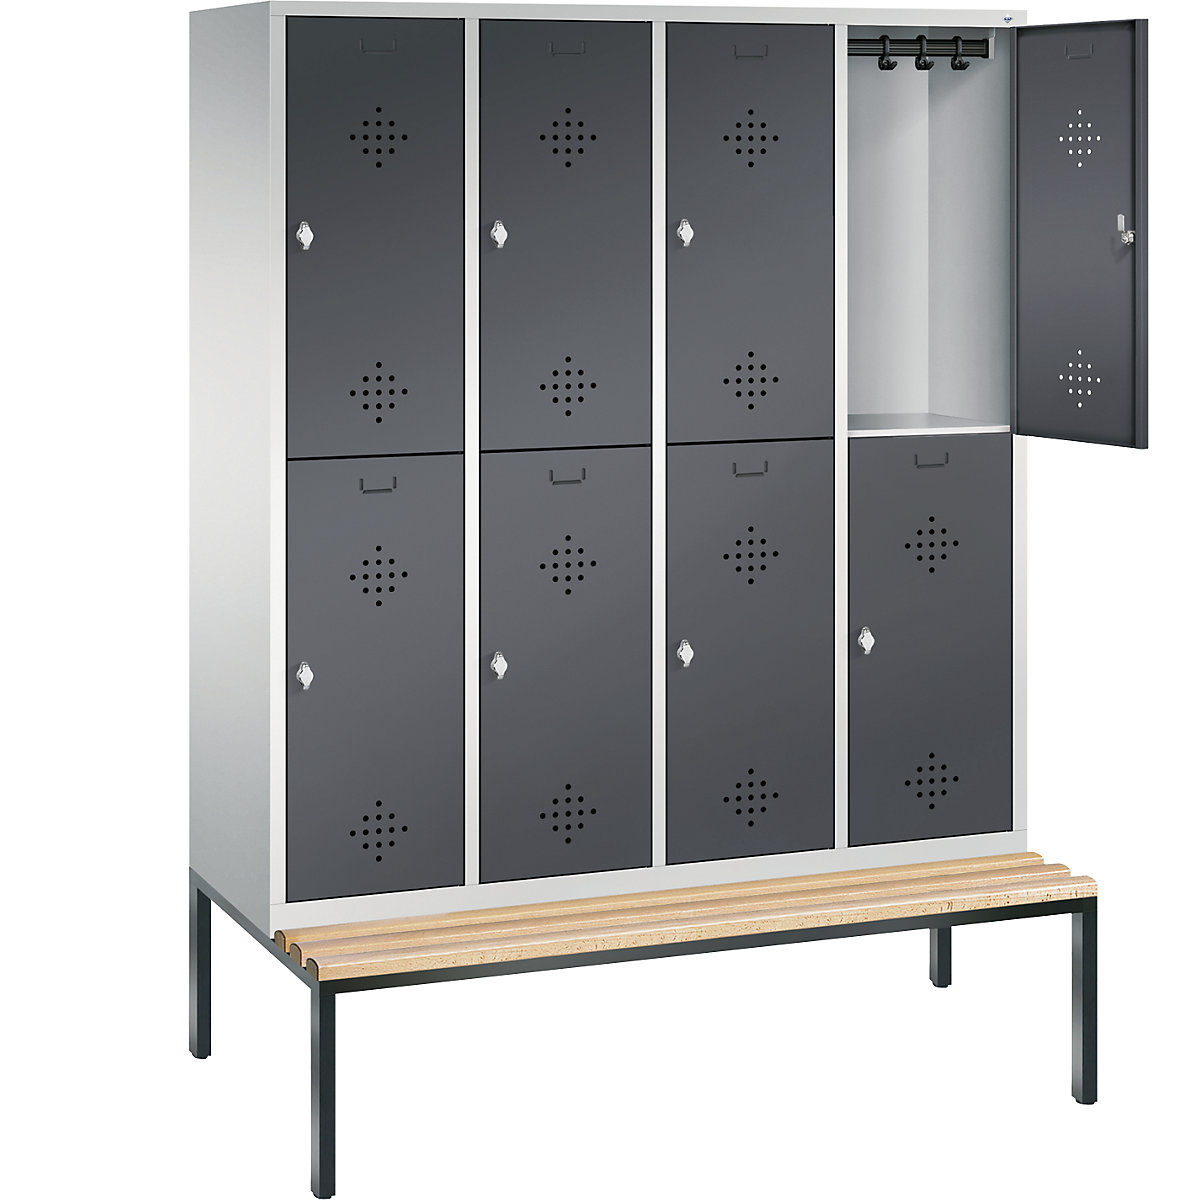 C+P: CLASSIC – kaiserkraft mounted compartment with tier bench locker 2 each, 400 cloakroom mm double compartments, shelf compartments underneath, width 4 |